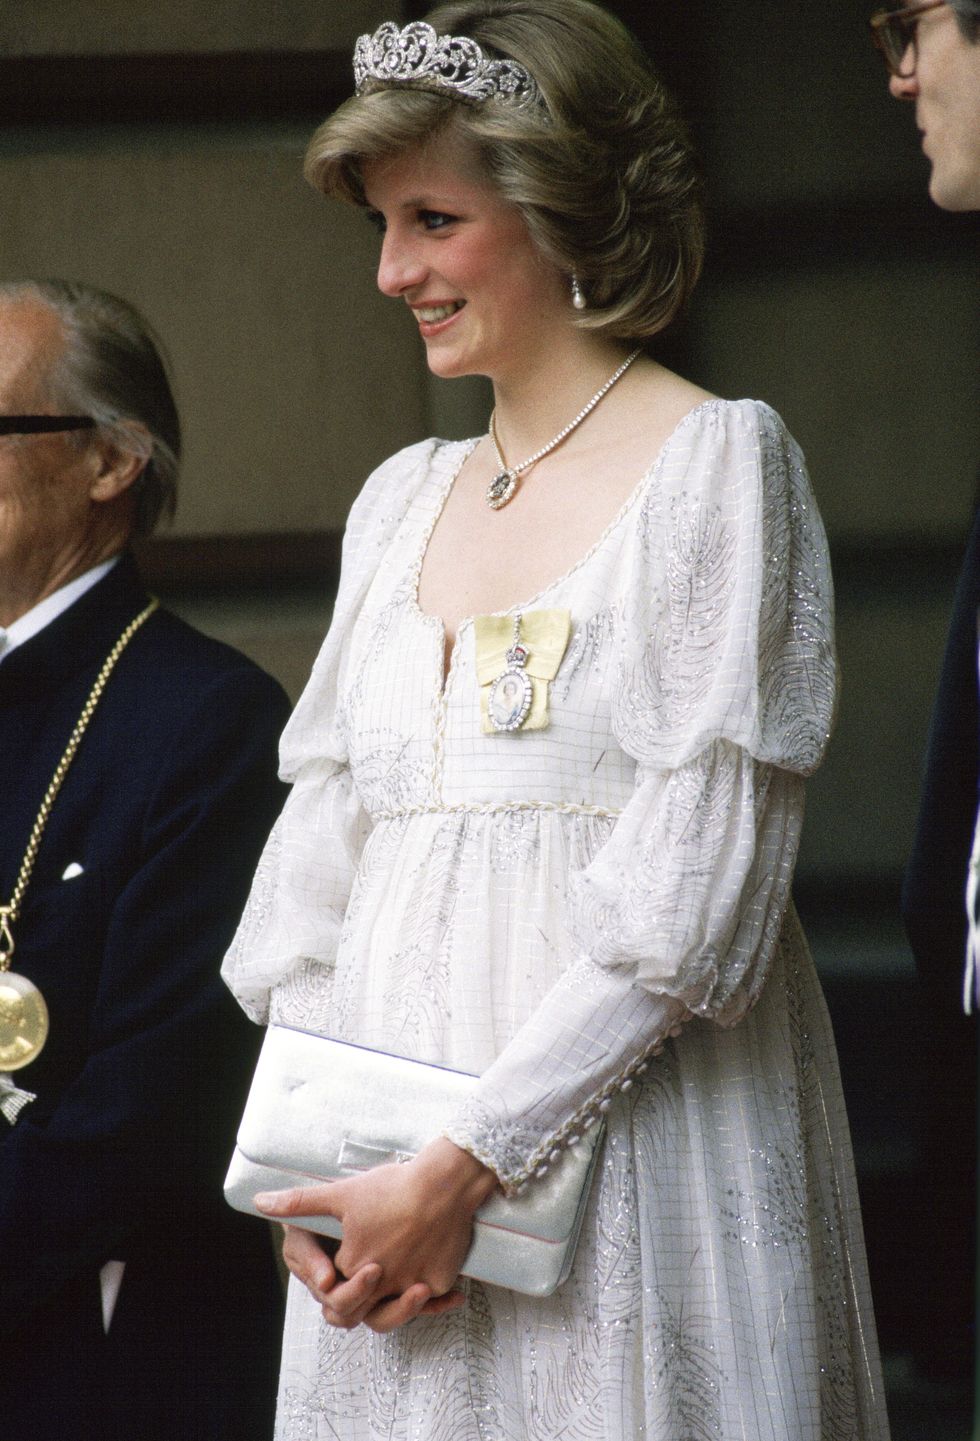 london, united kingdom   may 14  princess diana, pregnant with her second baby, wearing a maternity dress with the spencer family tiara, royal family orders and a diamond necklace in the shape of the prince of wales feathers, for an event at the royal academy  photo by tim graham photo library via getty images